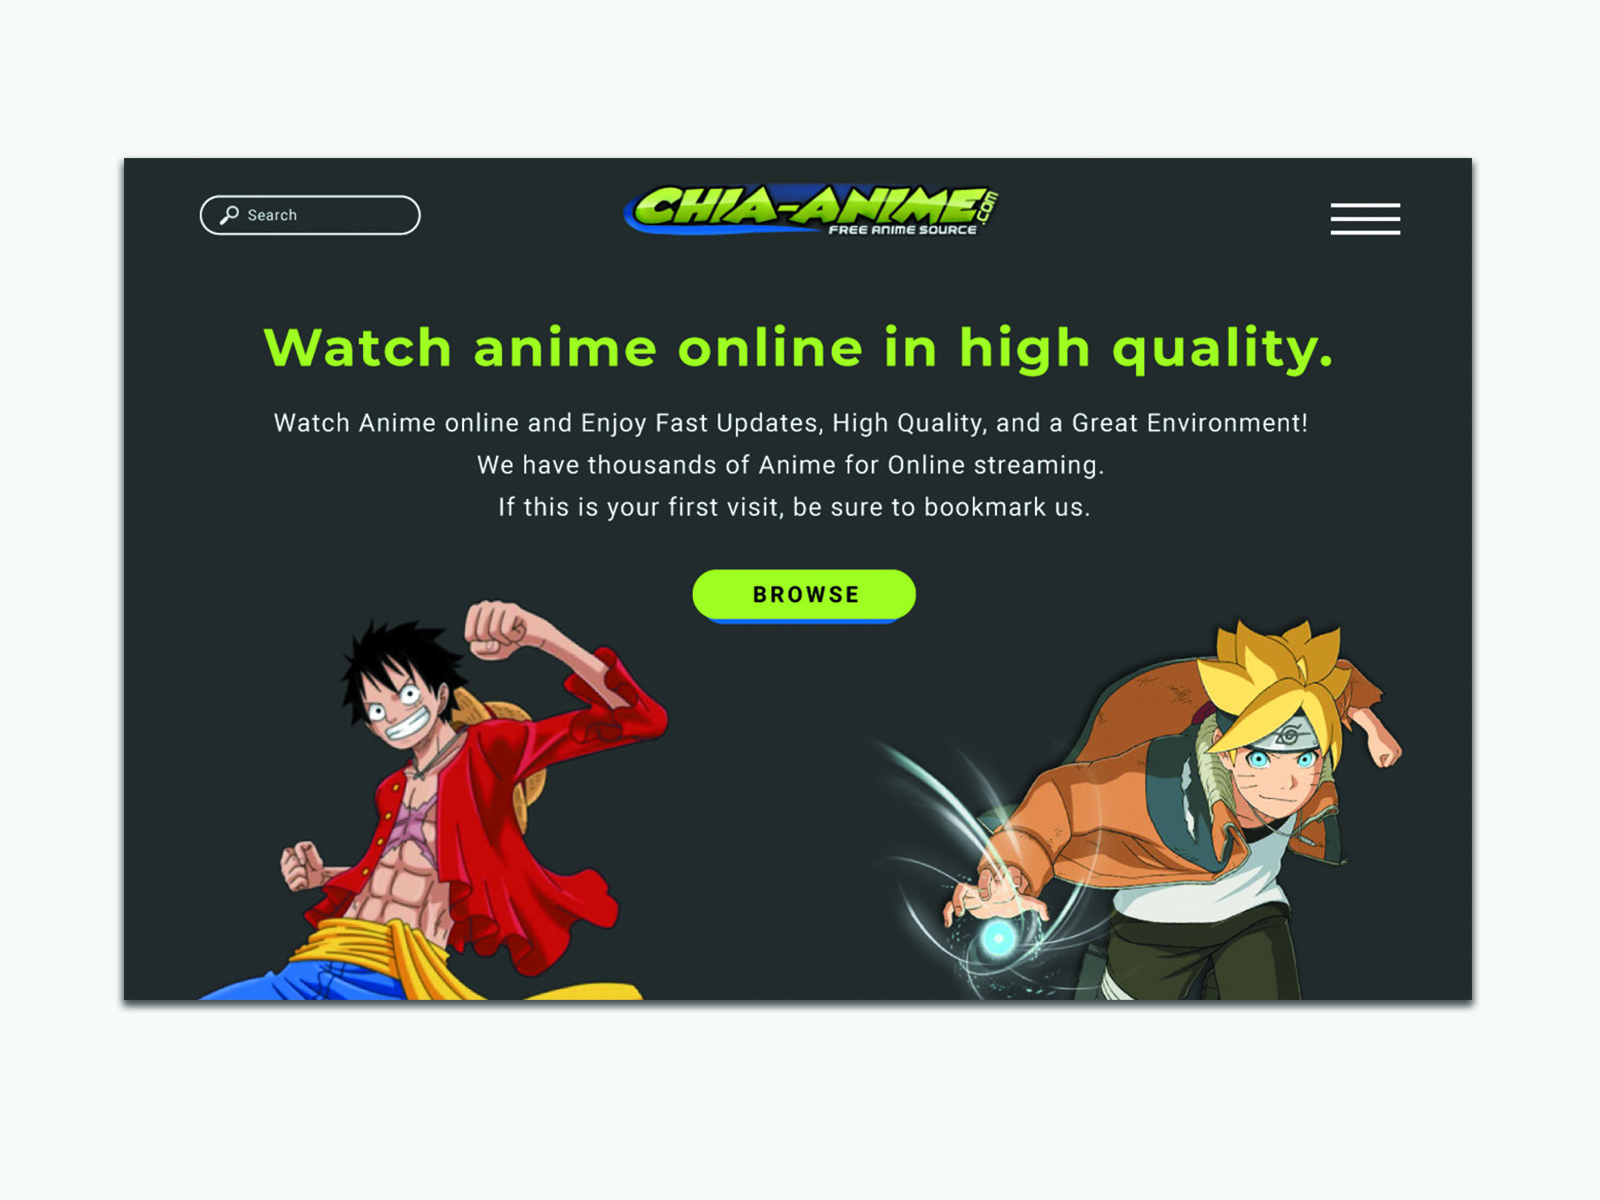 Chia-Anime by Danrelle Galicia on Dribbble